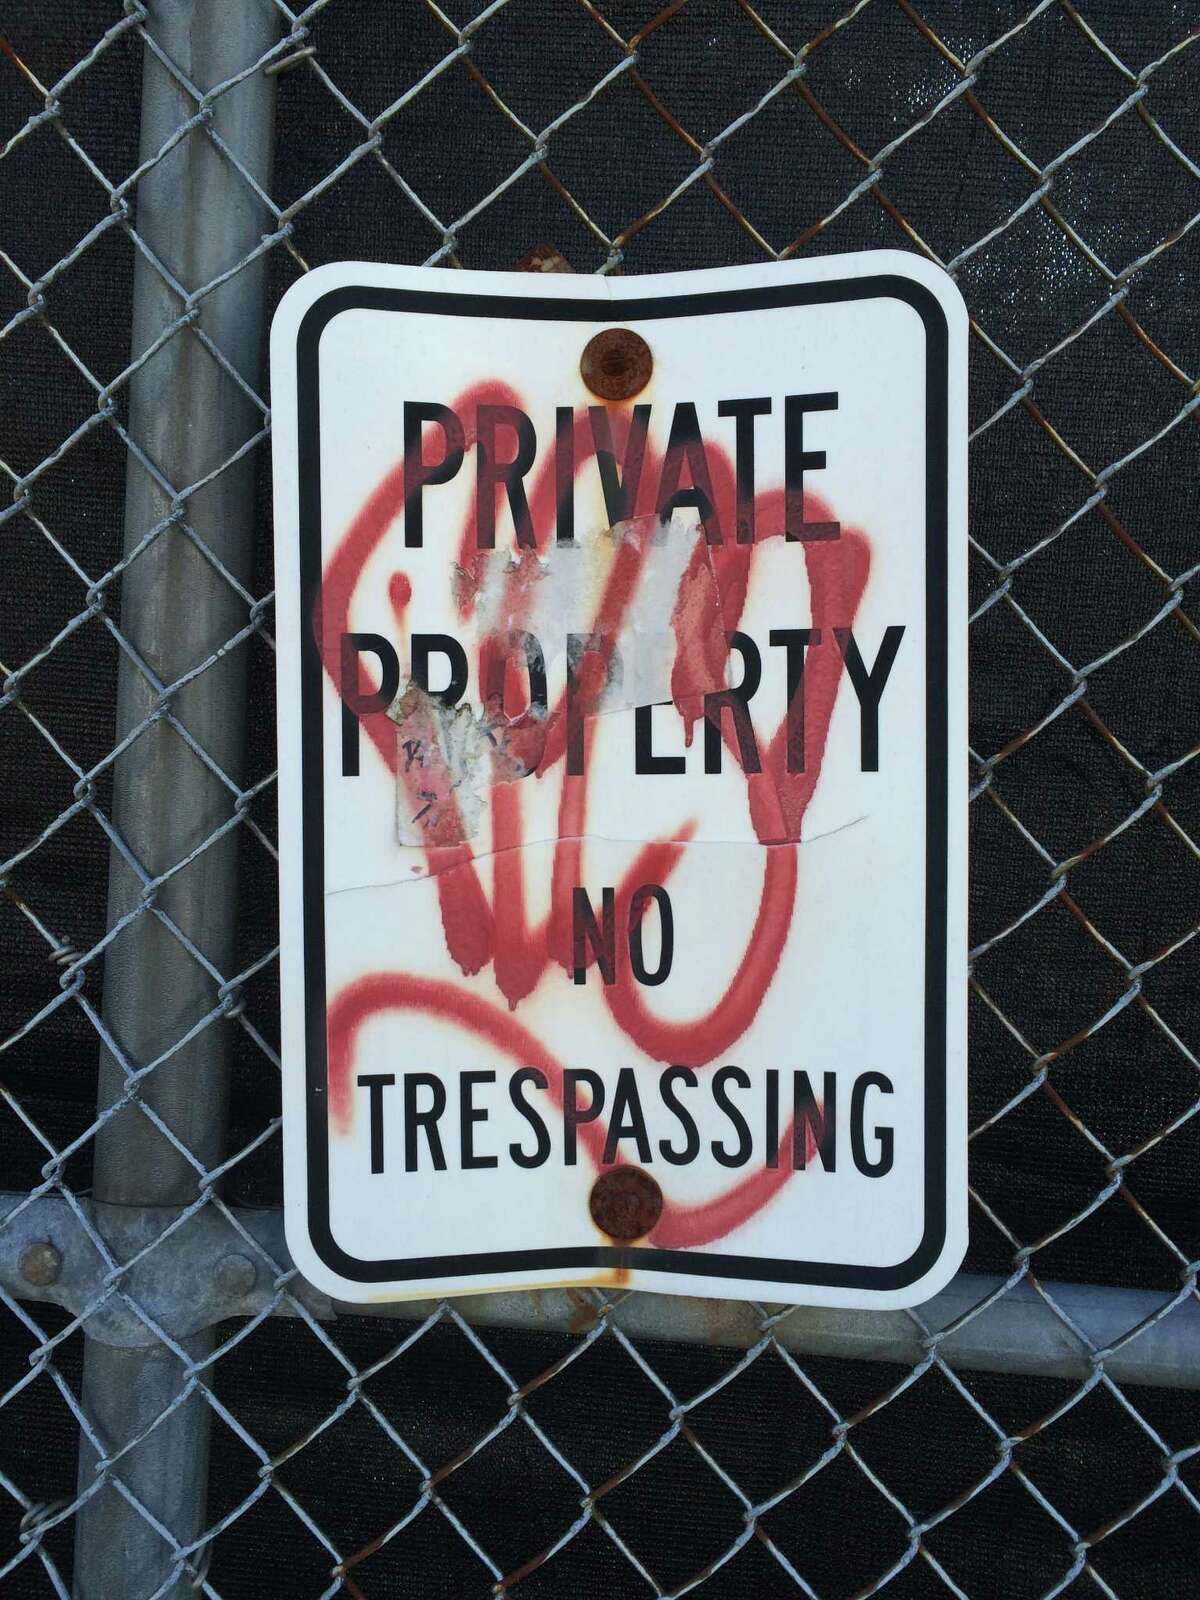 A vandalized sign on the fence surrounding the former Schenectady International factory site on 10th Avenue in Schenectady as seen on April 27, 2016. The DEC first began talks with the company to clean up the property in the 1990s. A finish of the remediation is expected in summer 2016. (Lauren Stanforth)